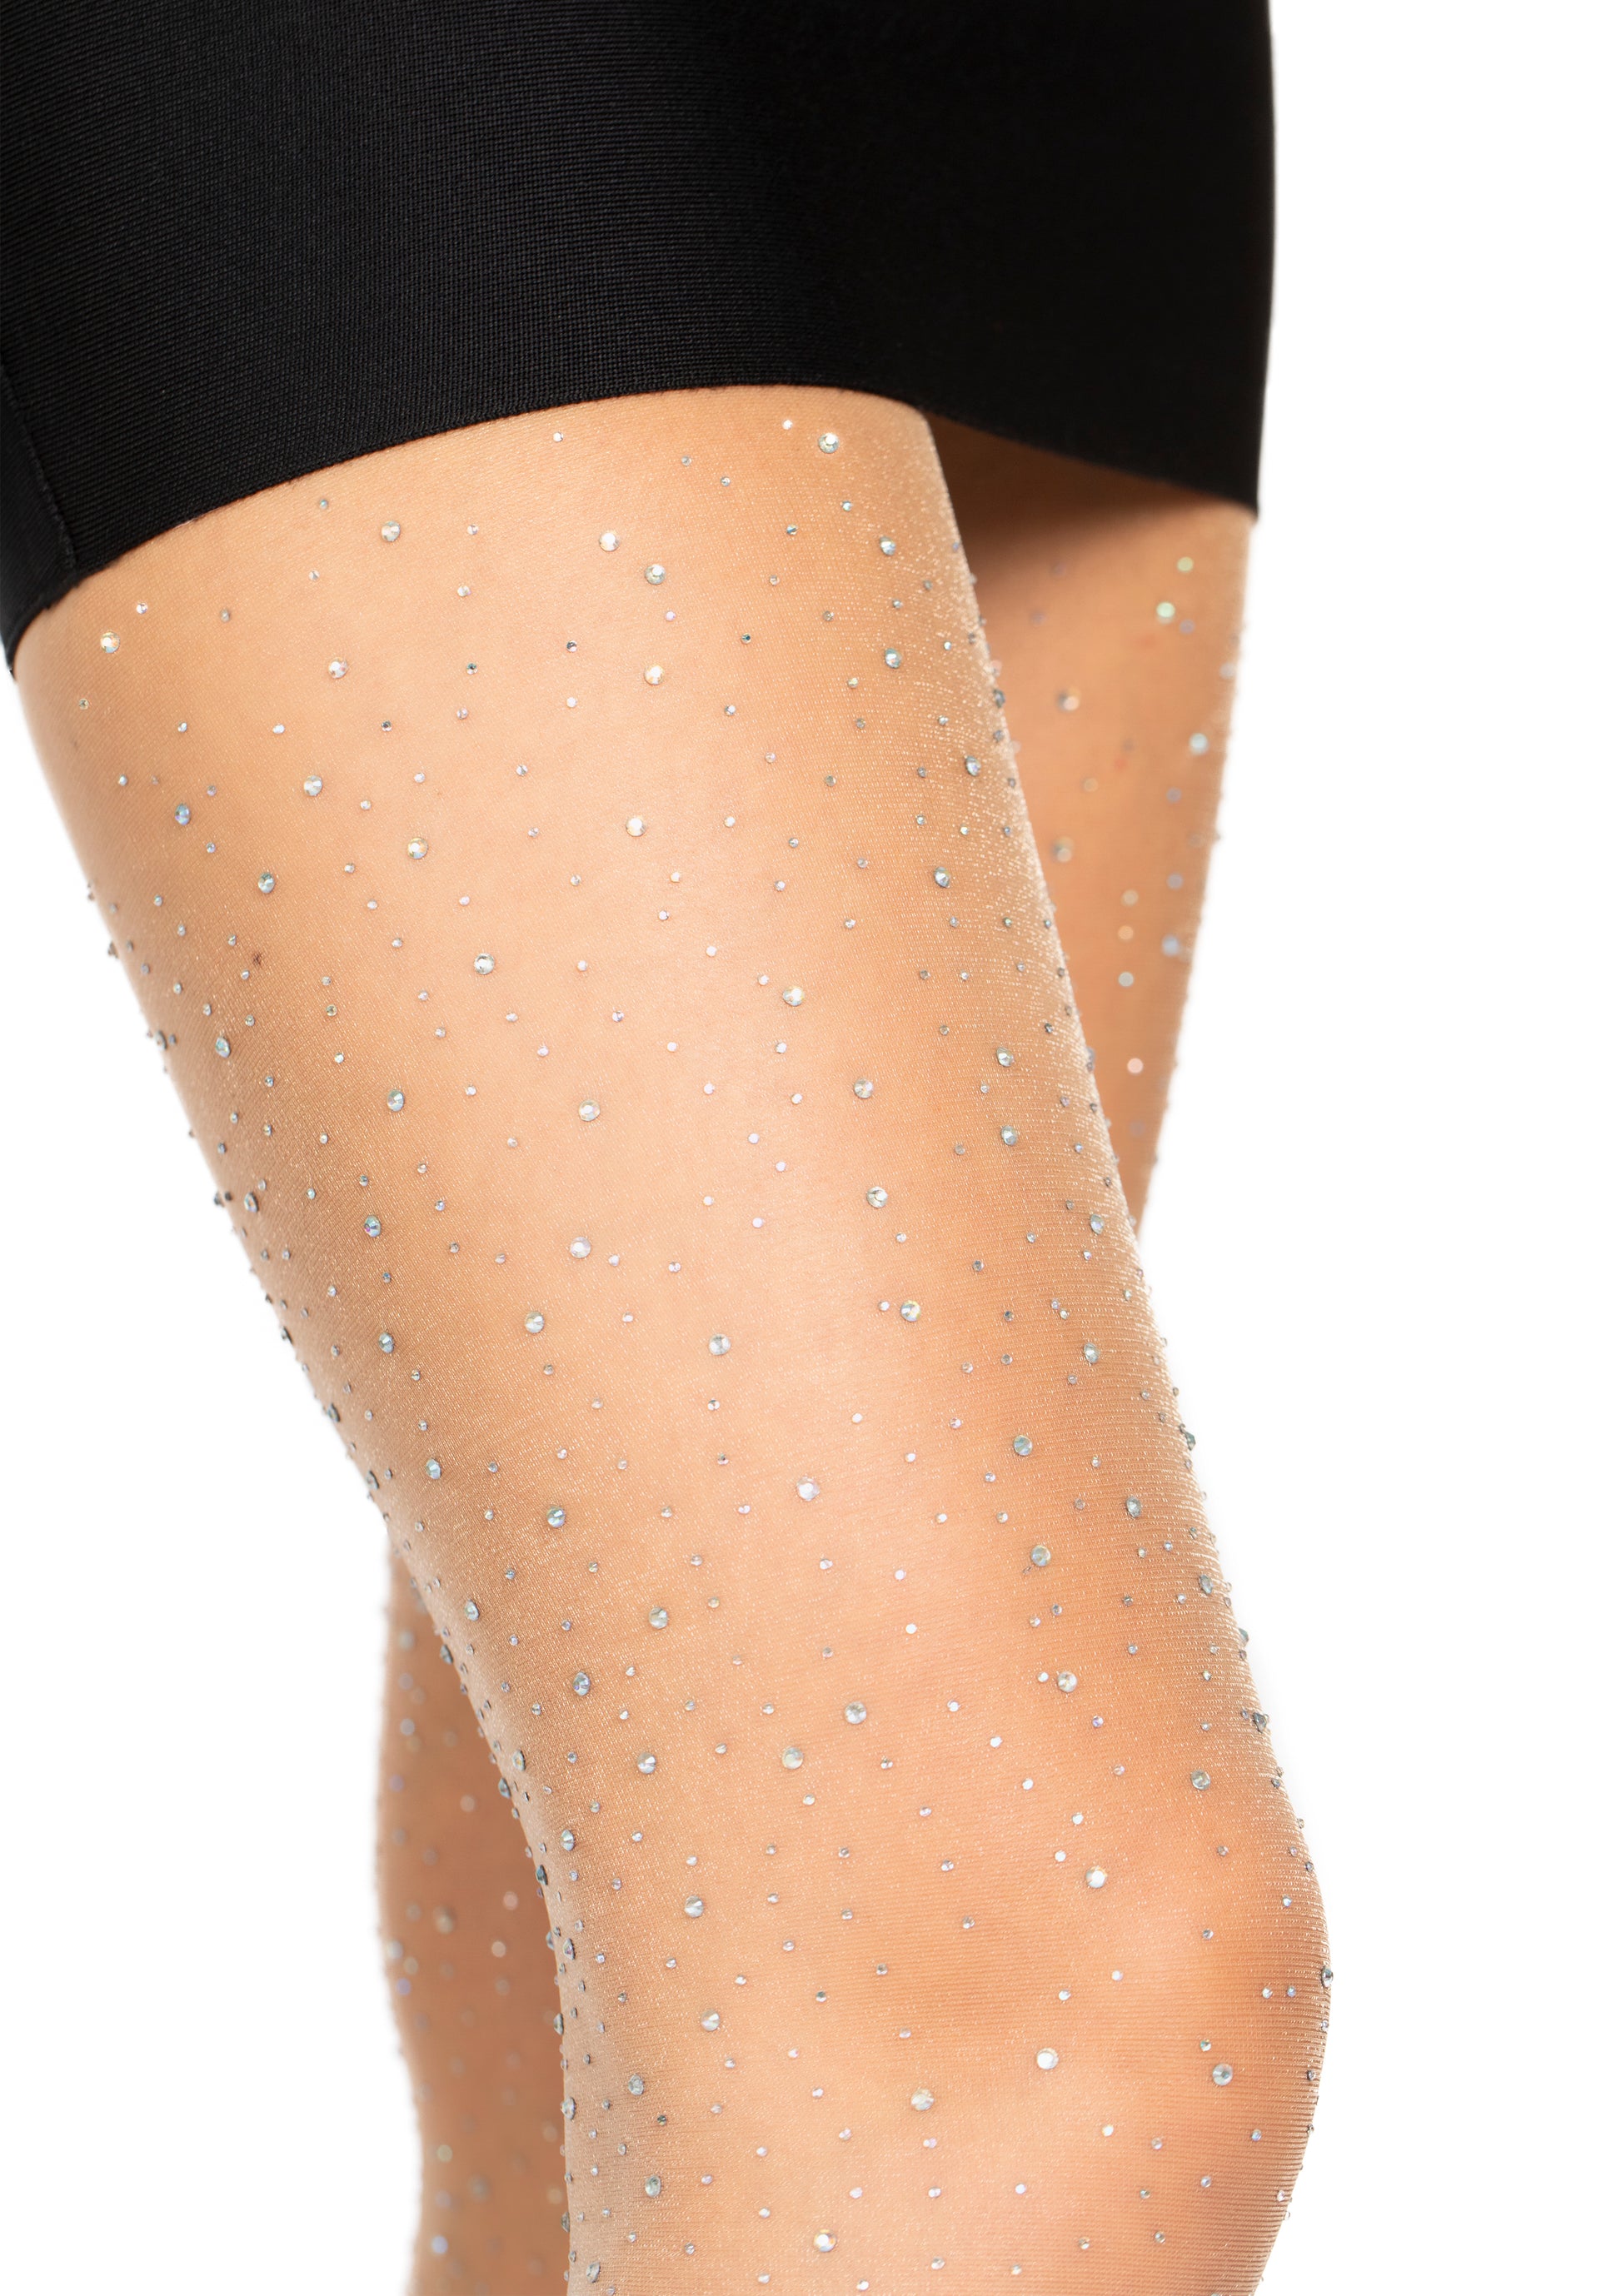 Leg Avenue 7957 Rhinestone Pantyhose - sheer nude tights with dotted gemstones / diamante crystals all over, perfect hosiery for the sparkly party season